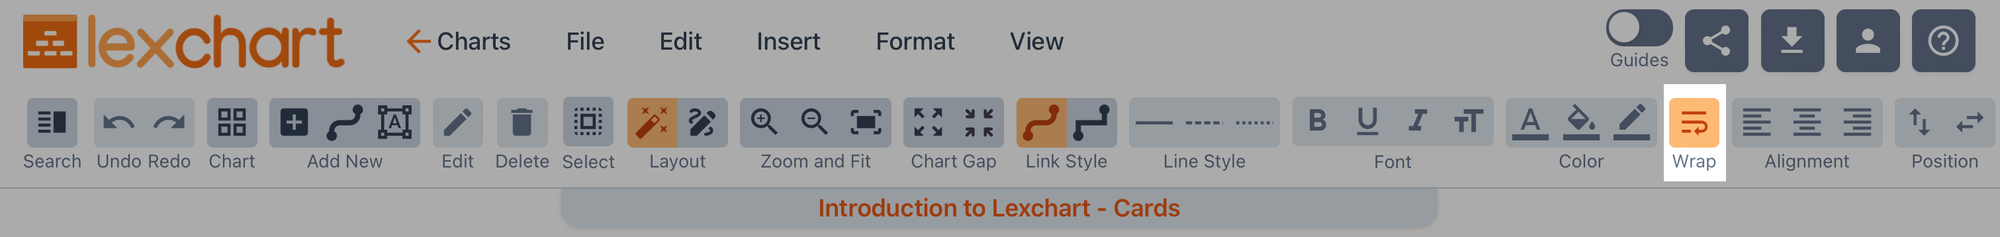 Word Wrap toggle in Lexchart